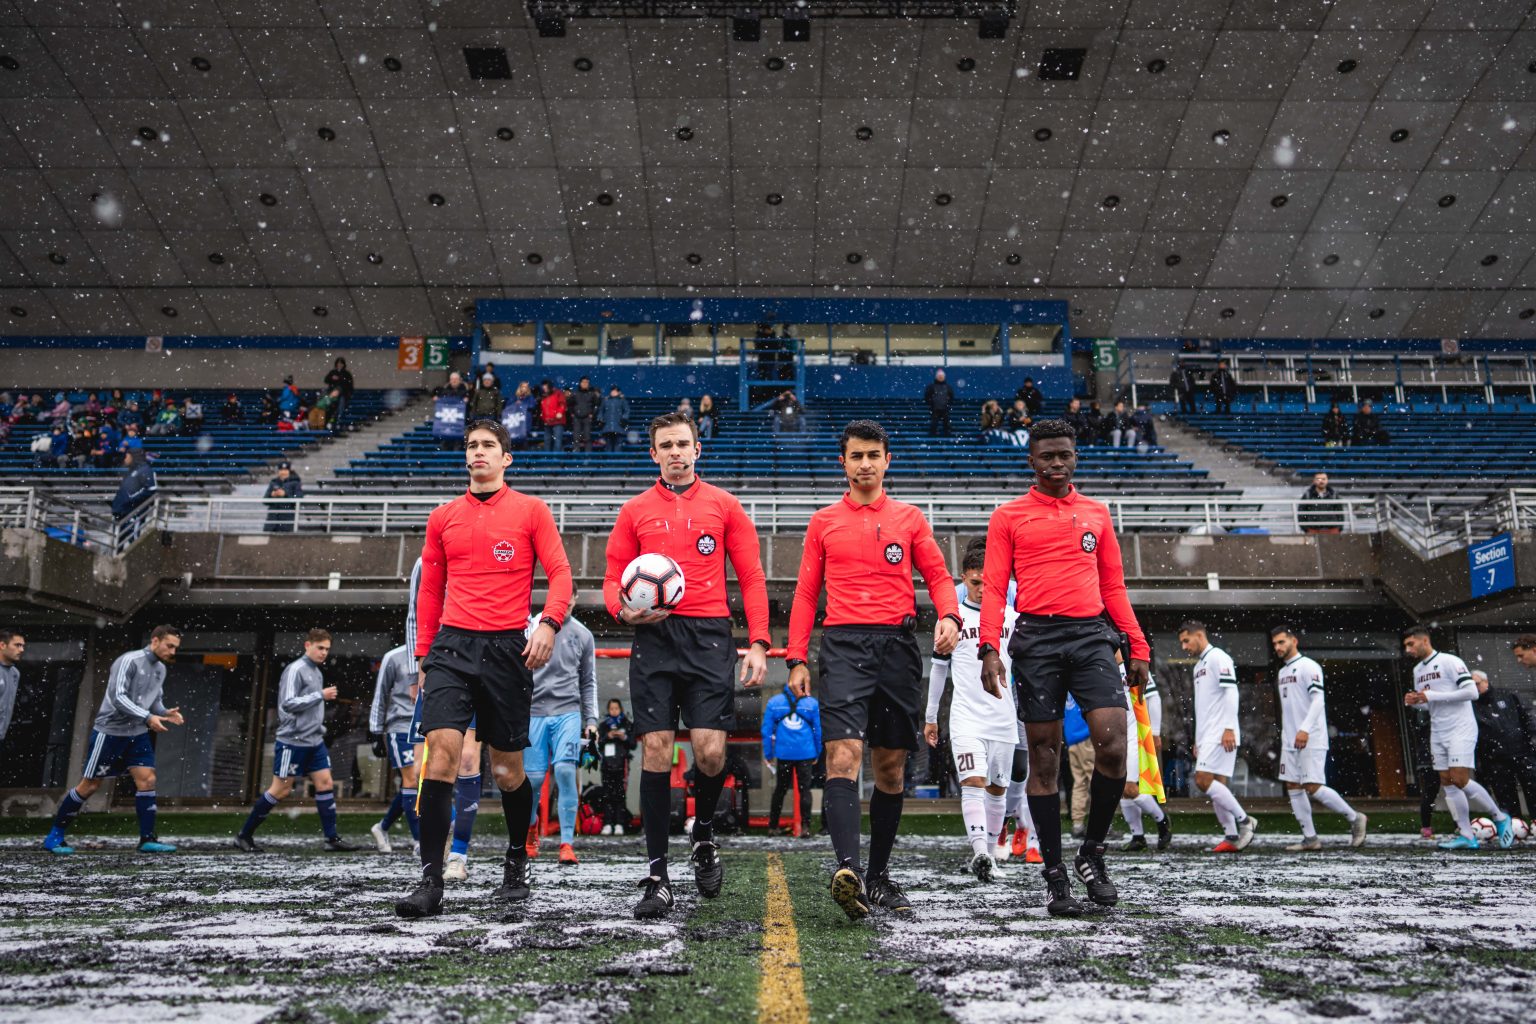 Four soccer players enter a snowy stadium wearing red and black uniforms. 